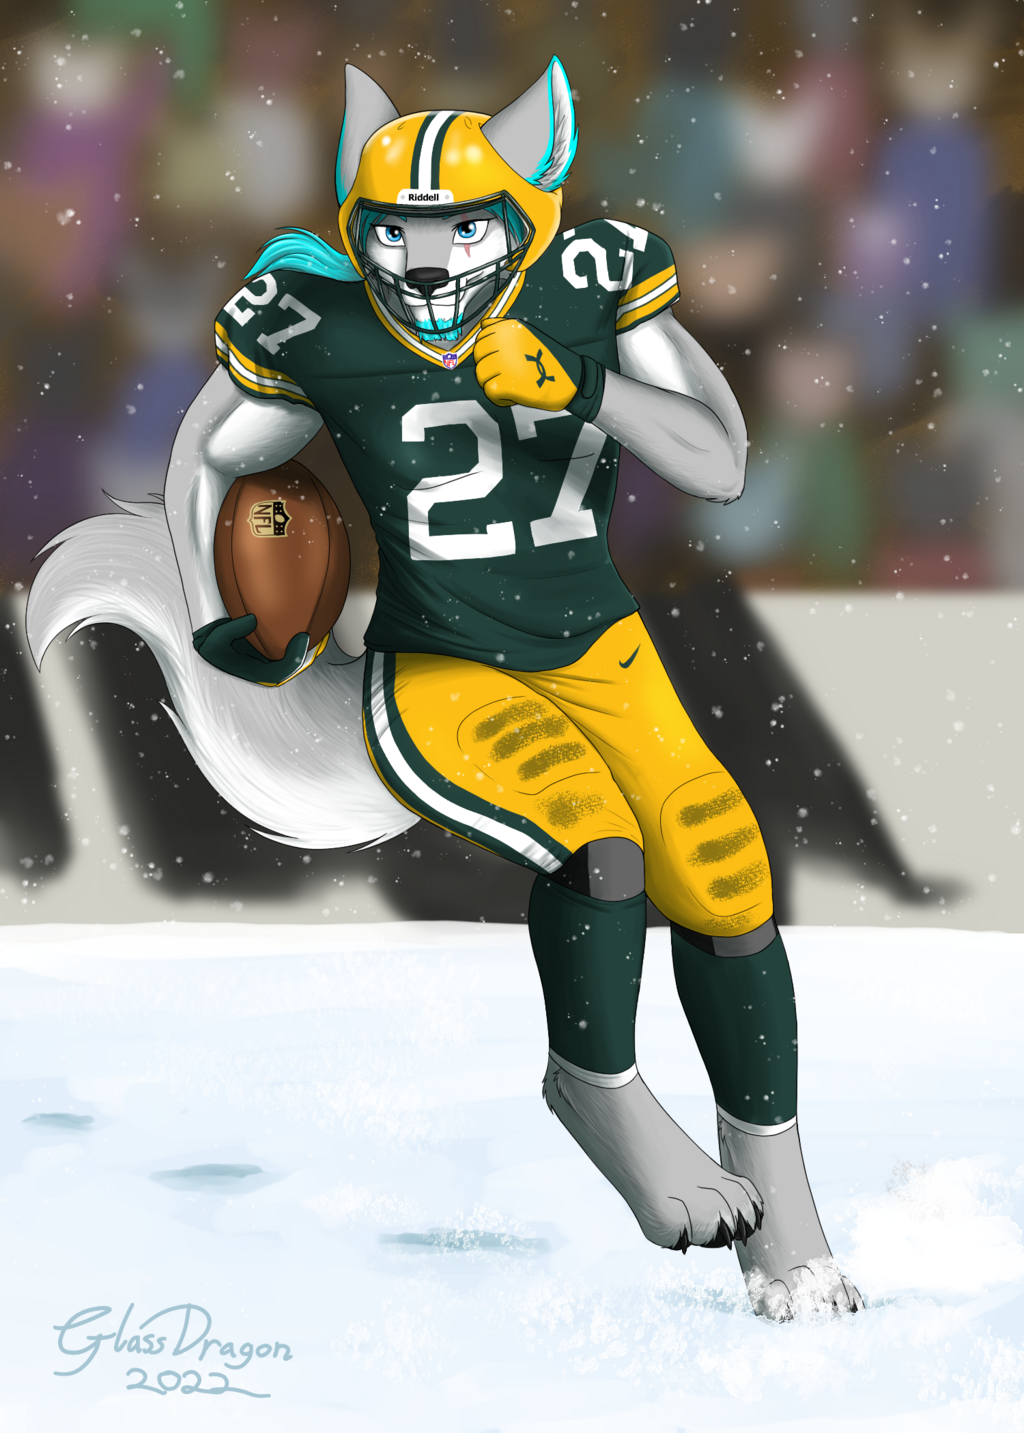 Most recent image: Winter Football